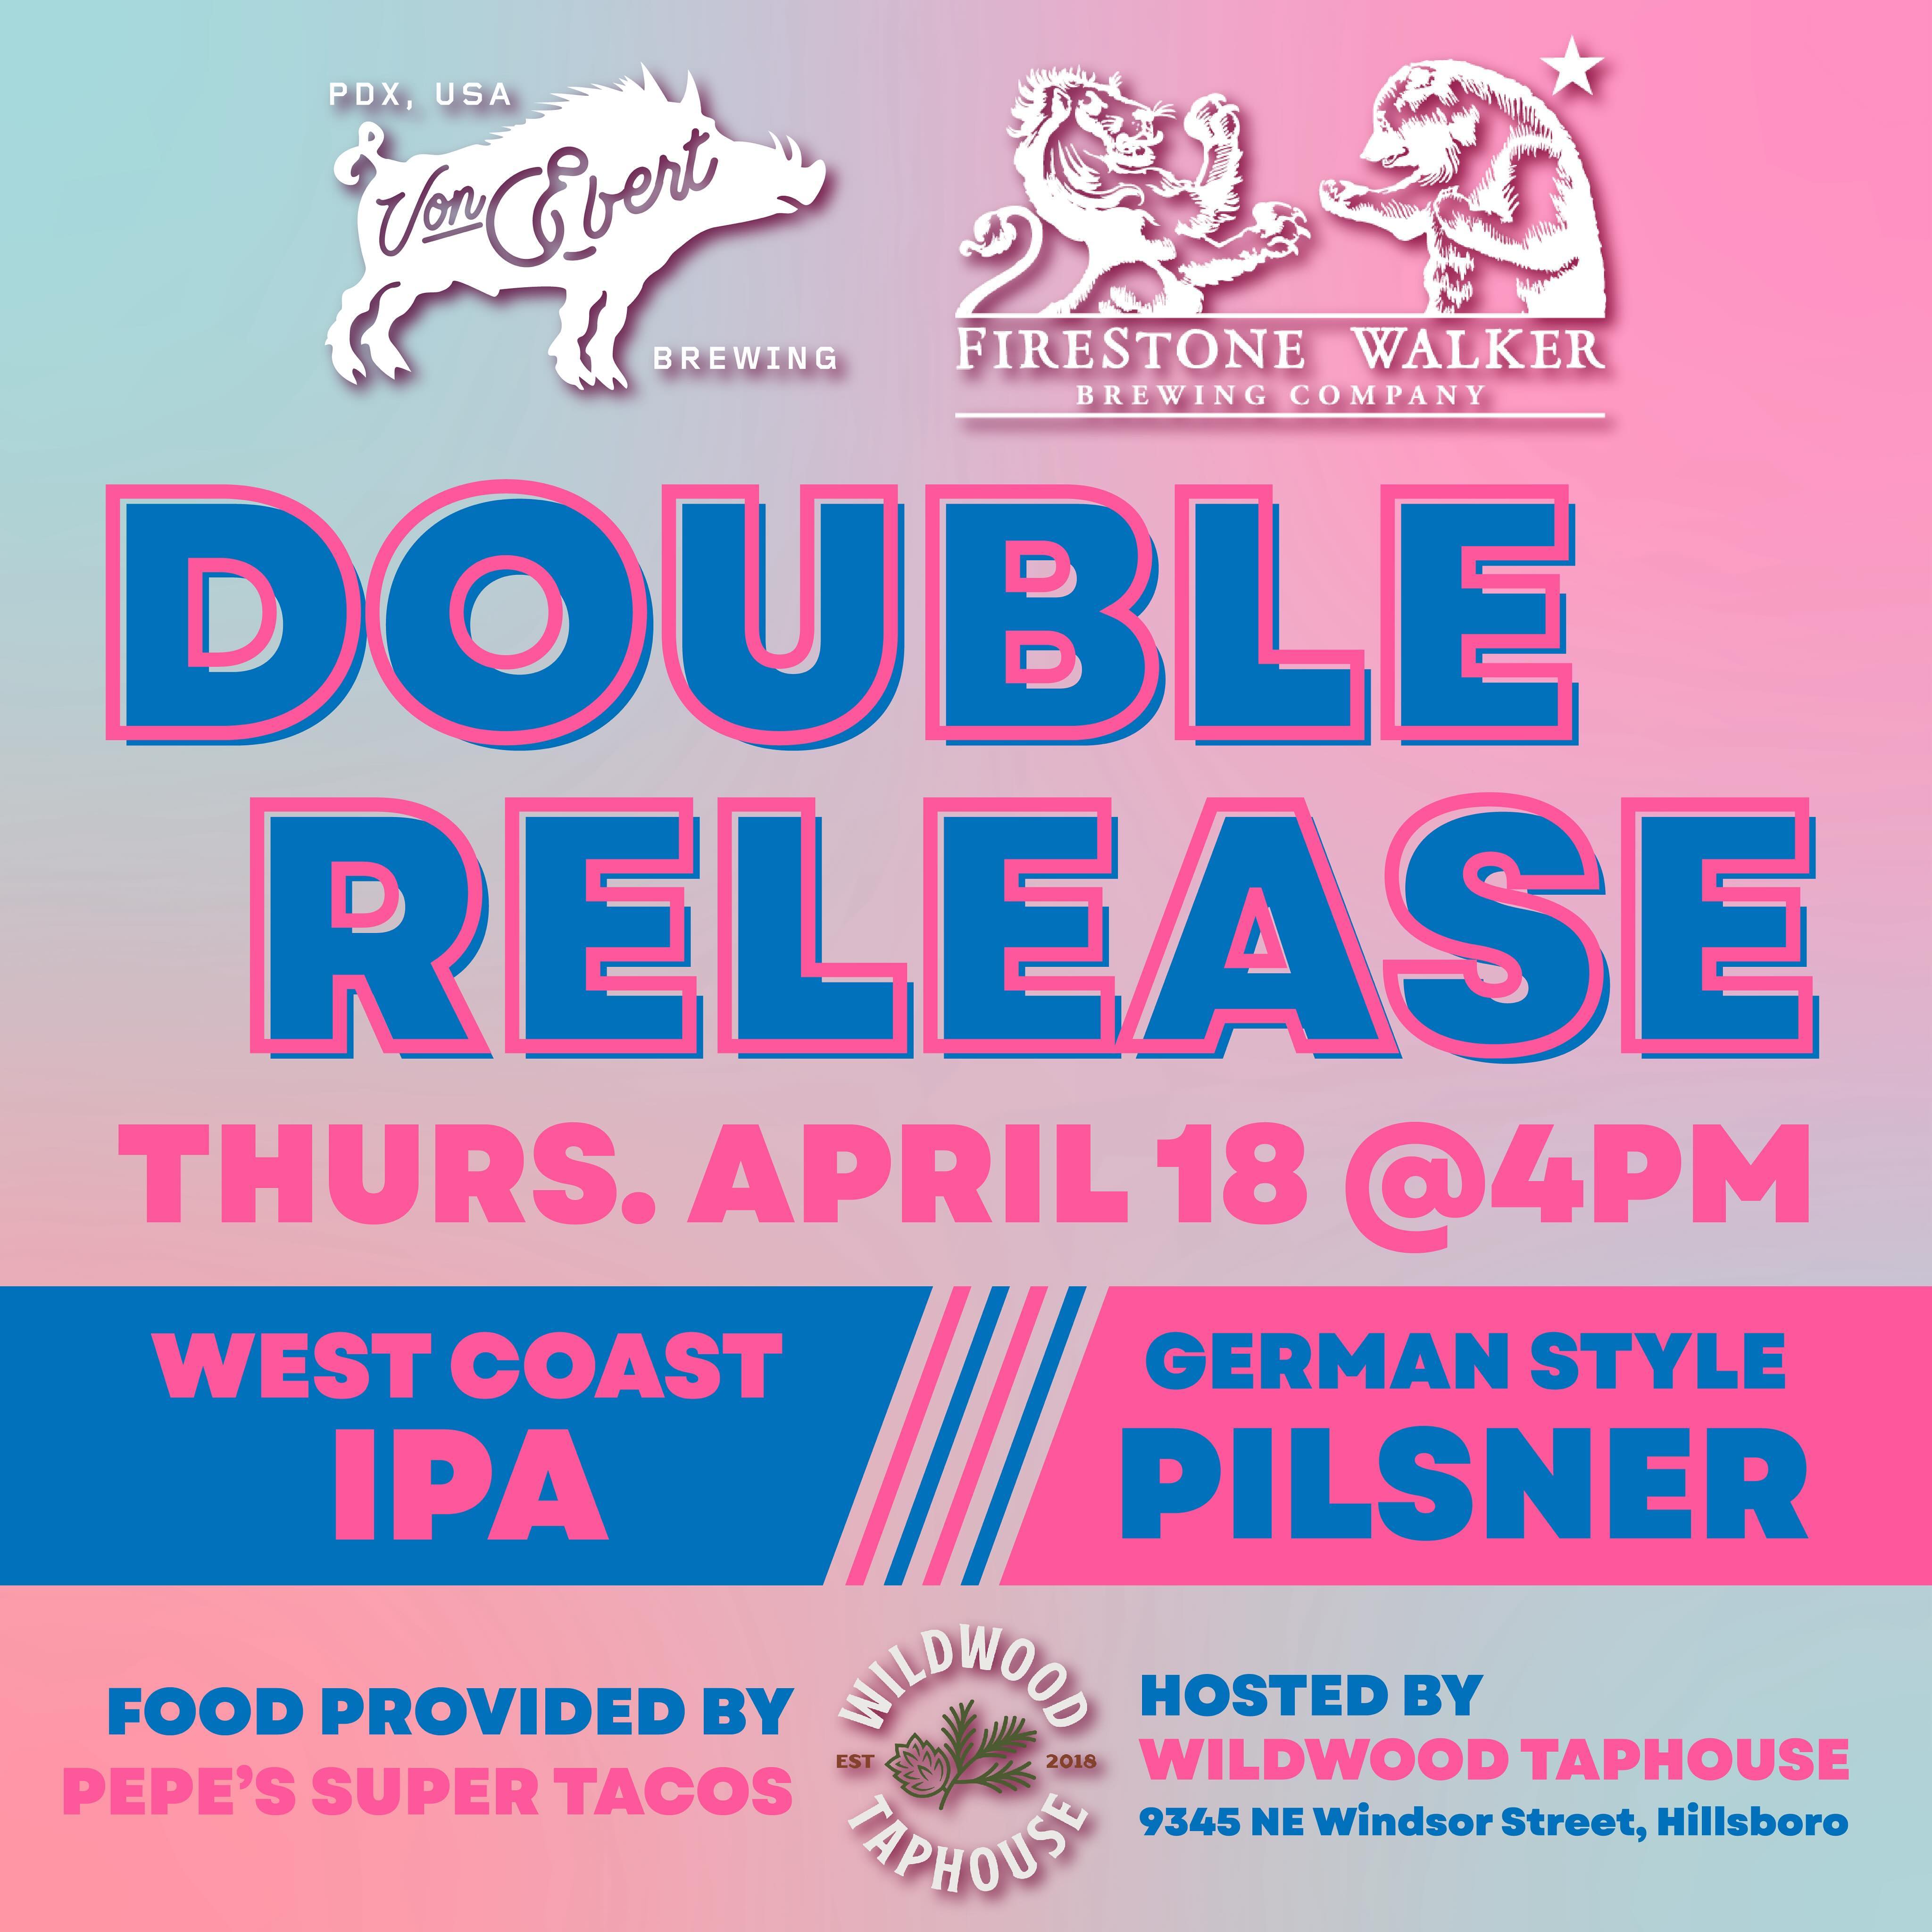 My goodness we are so excited and honored to be doing the collaboration release party for TWO beers from Von Ebert & Firestone Walker! You ready to party?!? 
.
Thursday, April 18th we will be tapping a German style pilsner as well as a west coast IPA. Cans will also be available to go! 
.
At 4pm we will have Pepe’s Super Tacos slinging some excellent food as well! 
Come hang with the fine folks from Von Ebert & Firestone Walker, enjoy some great beers with great people. 
See you there!!
.
@vebrewing @firestonewalker 
.
.
.
#wildwoodtaphouse #wildwoodtap #vonebertbrewing #firestonewalker #firestonewalkerbrewing #collaborationbeer #beerrelease #germanpilsner #westcoastipa #pnwbeer #pdxbeer